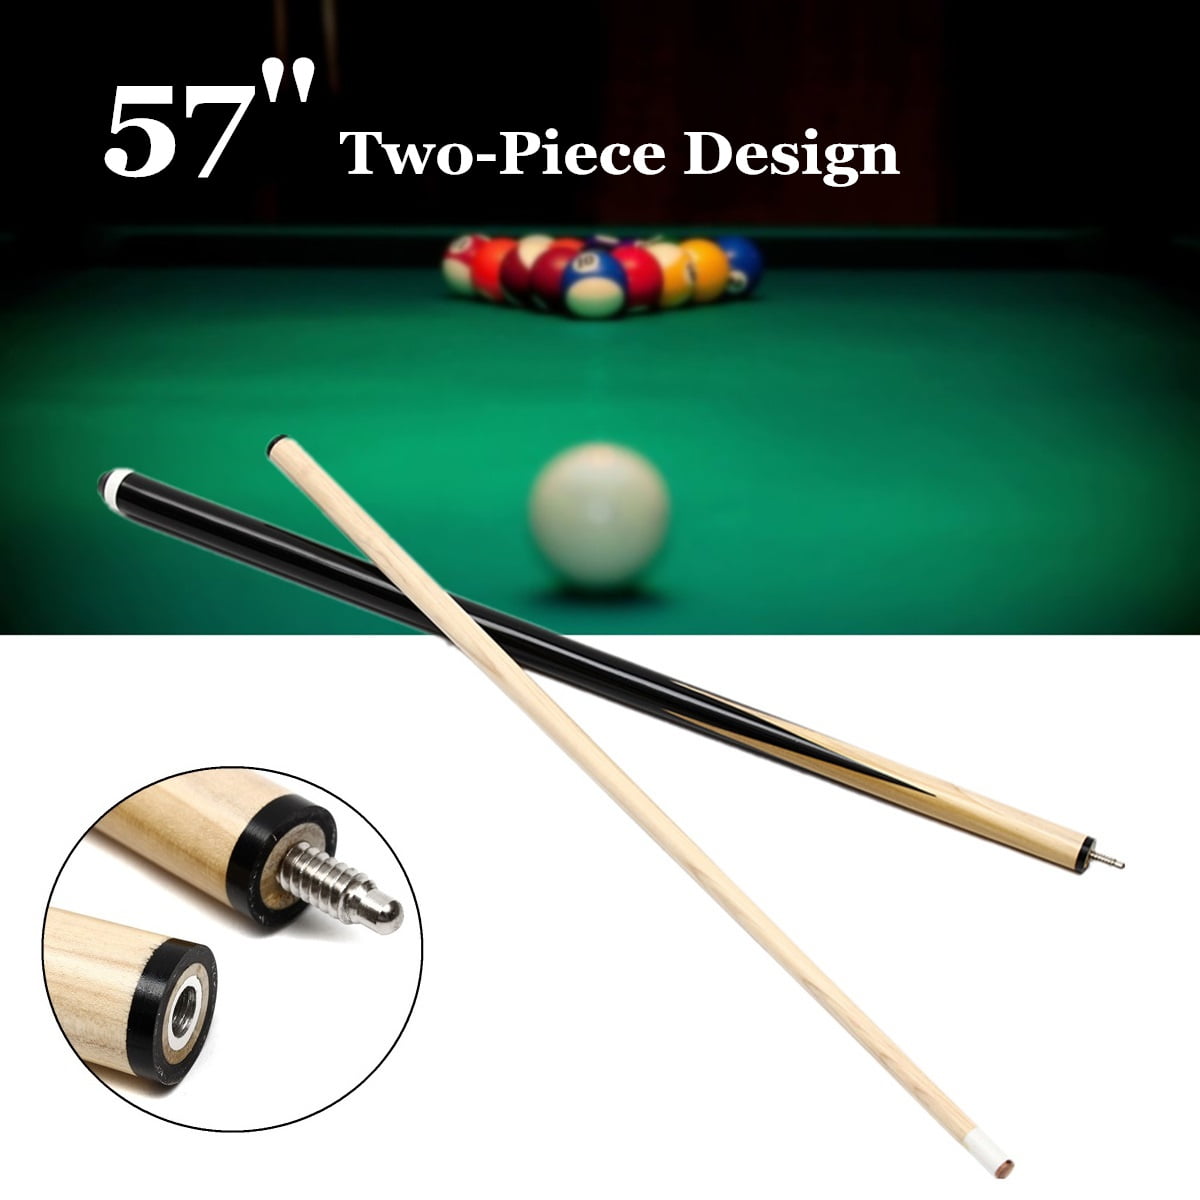 8 FREE TIPS IDEAL FOR KIDS & SMALL SPACES 2 x 2pc 48" CENTER SPLIT POOL CUES 